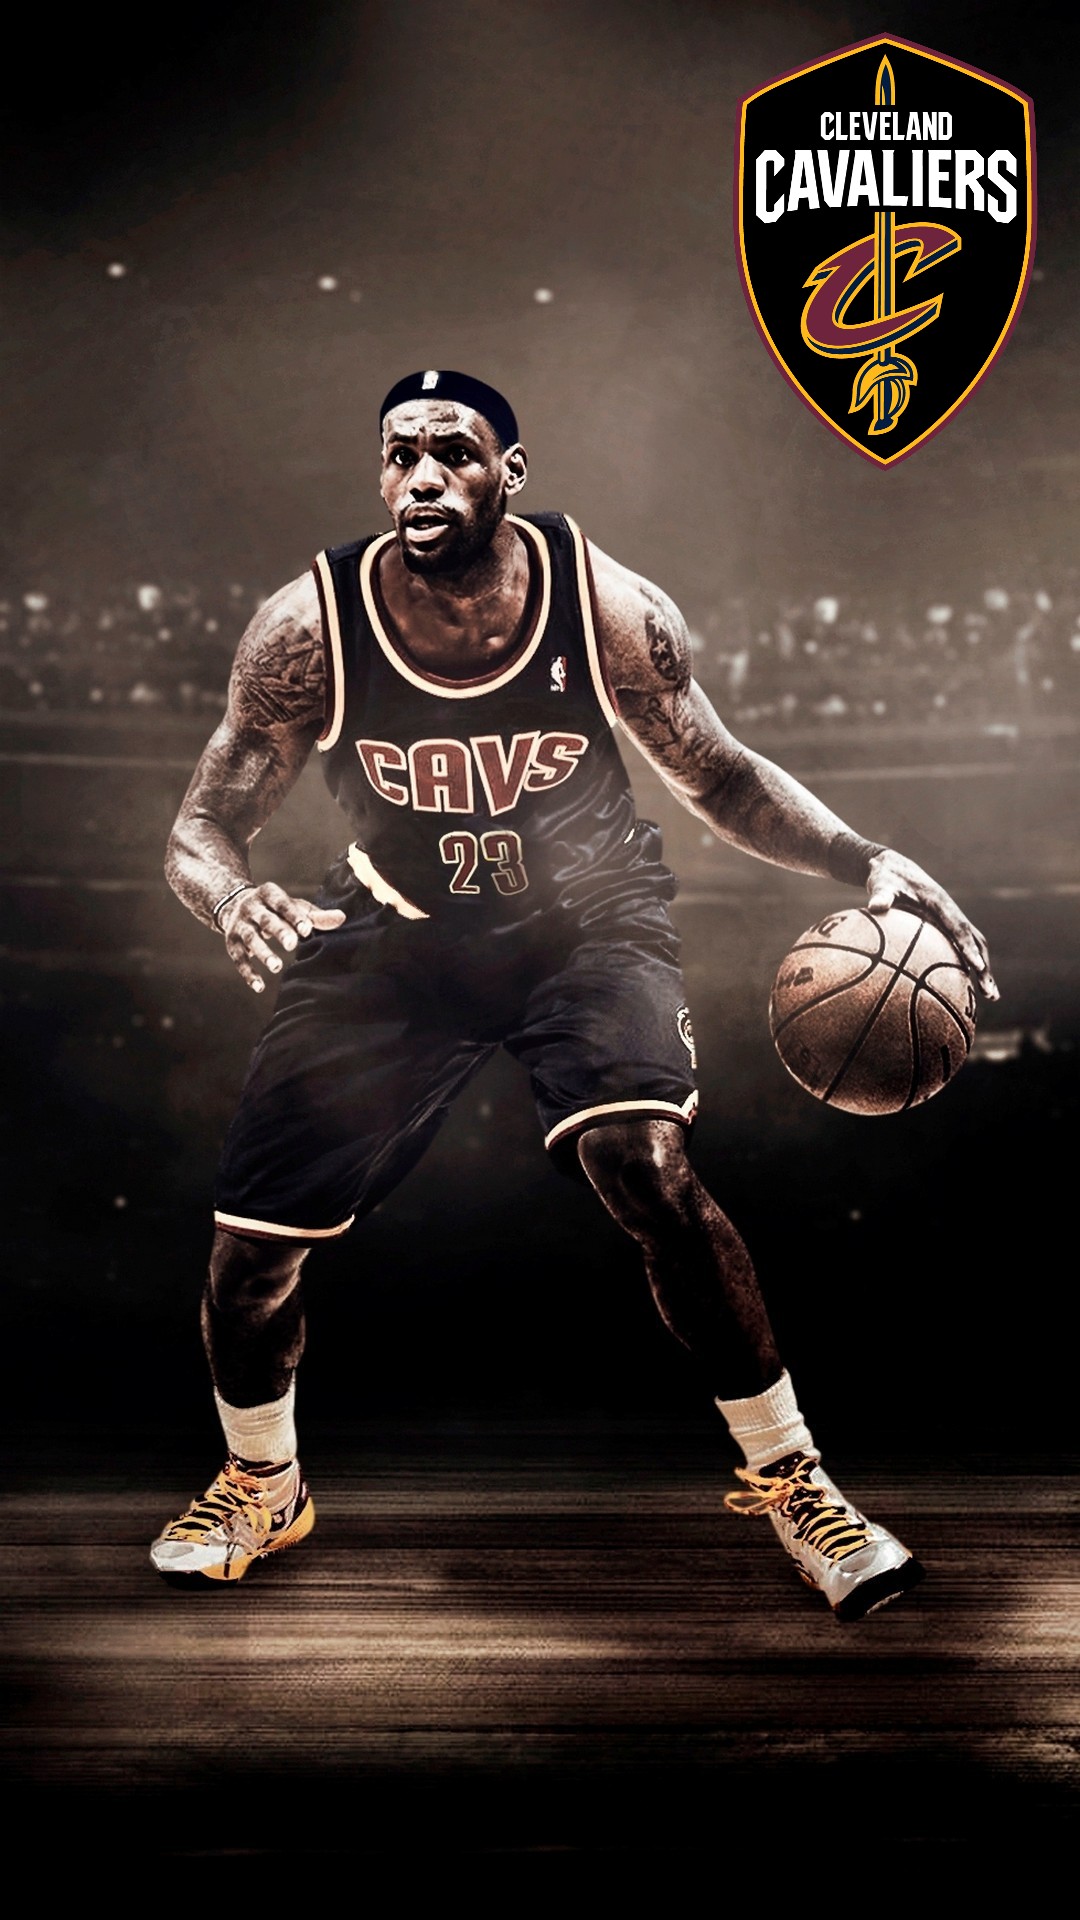 Wallpaper Cleveland Cavaliers NBA Mobile 1080x1920